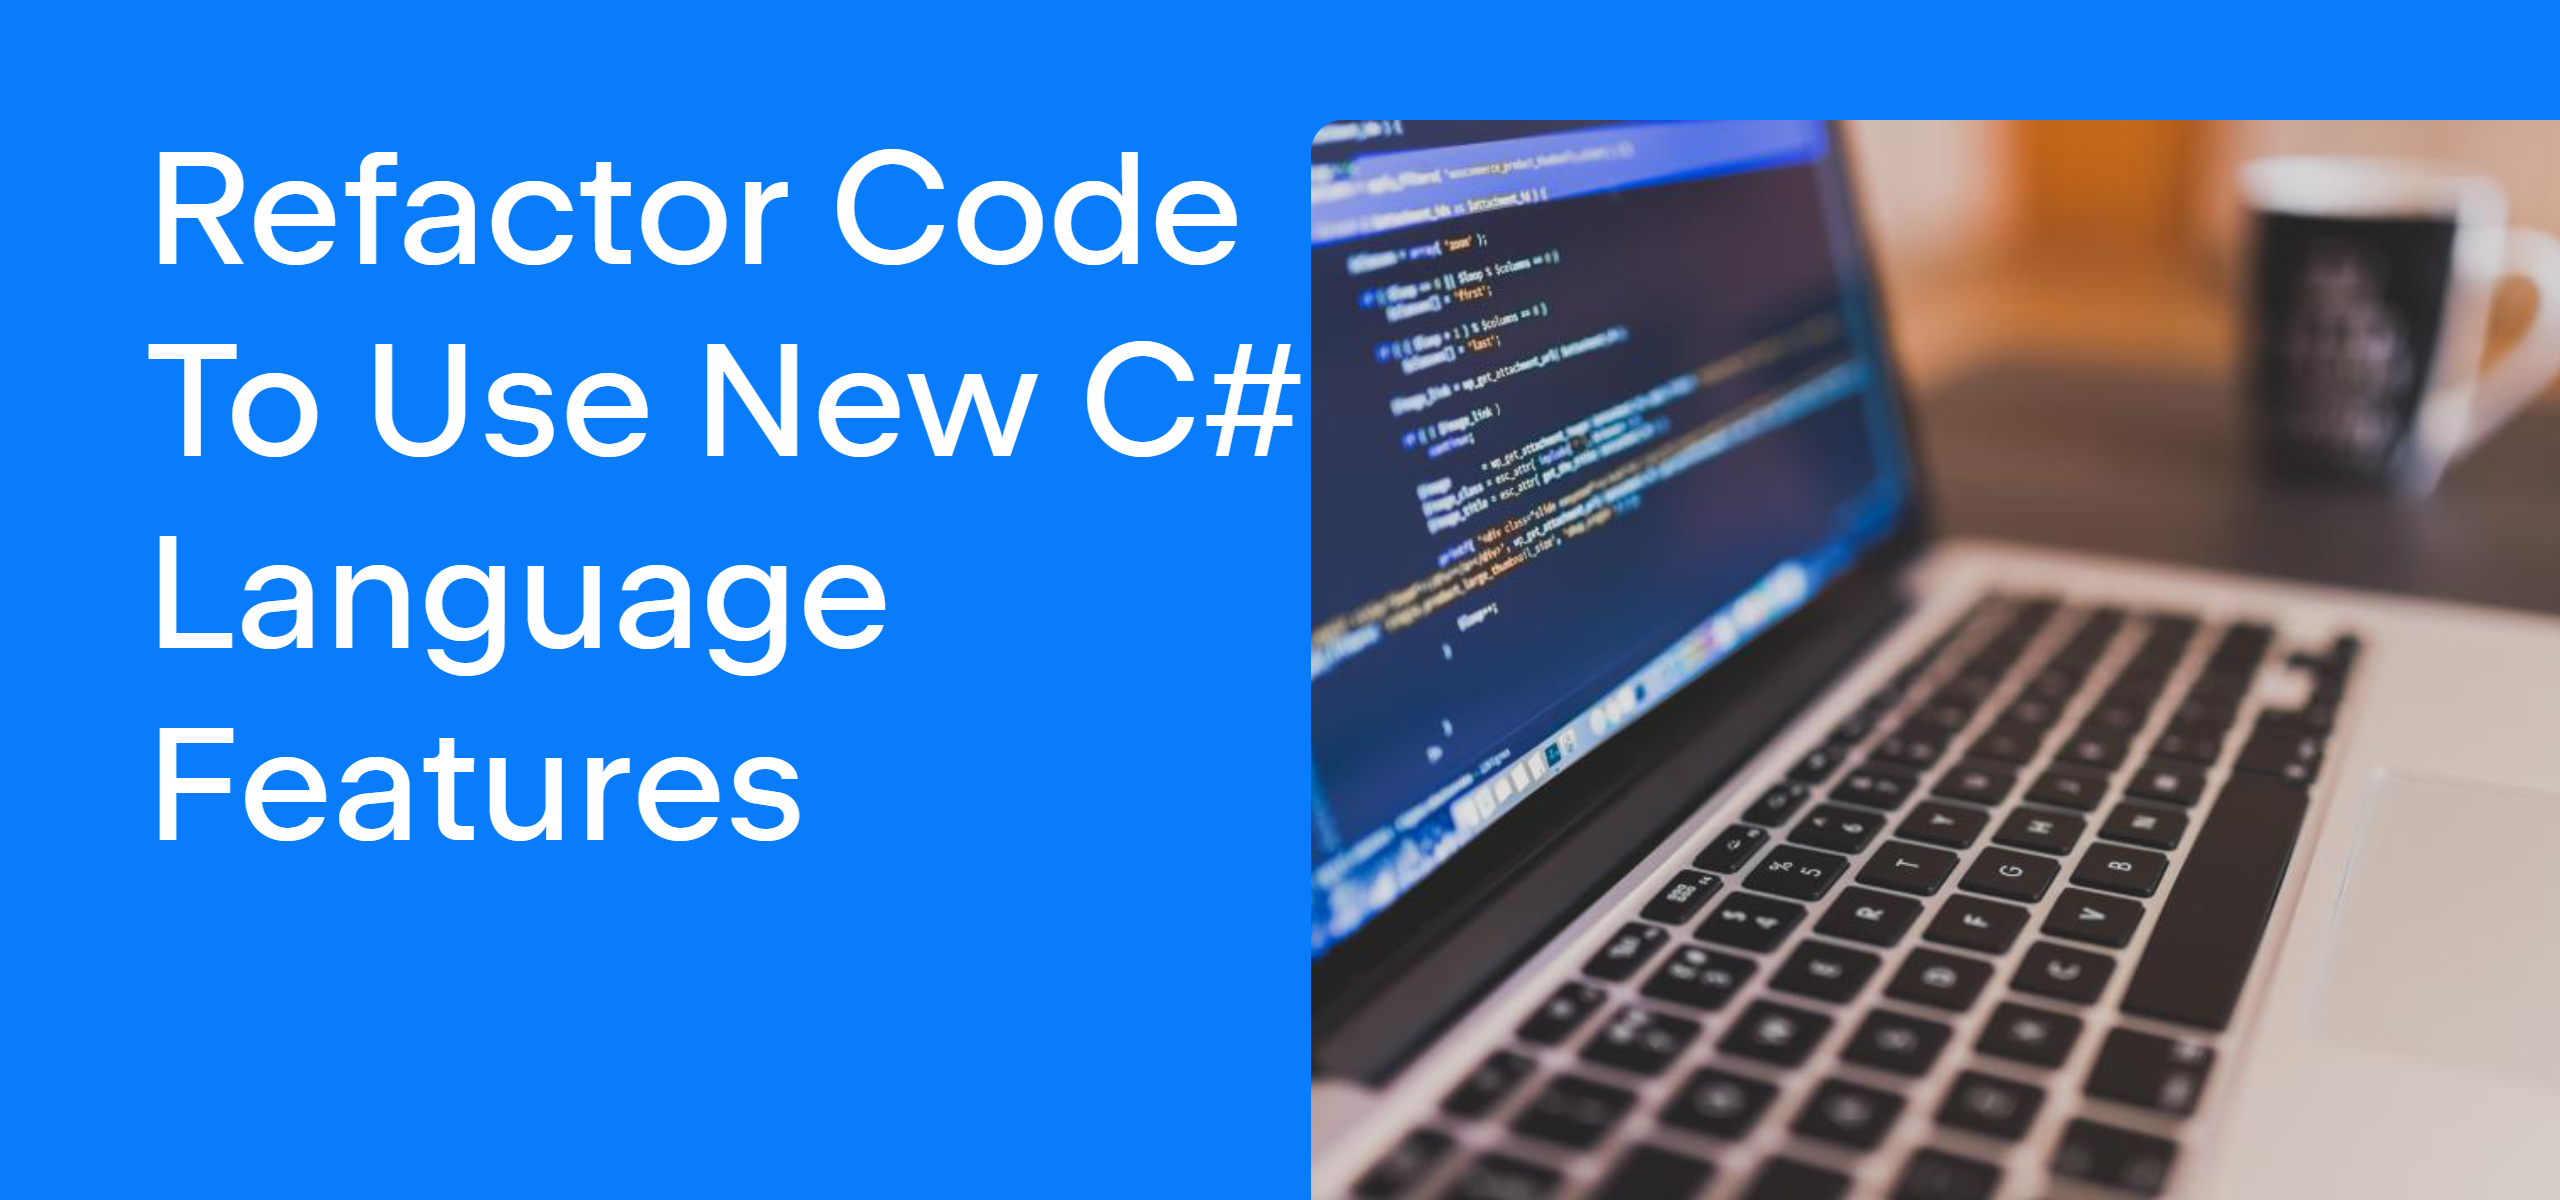 Refactor code to use new C# language features